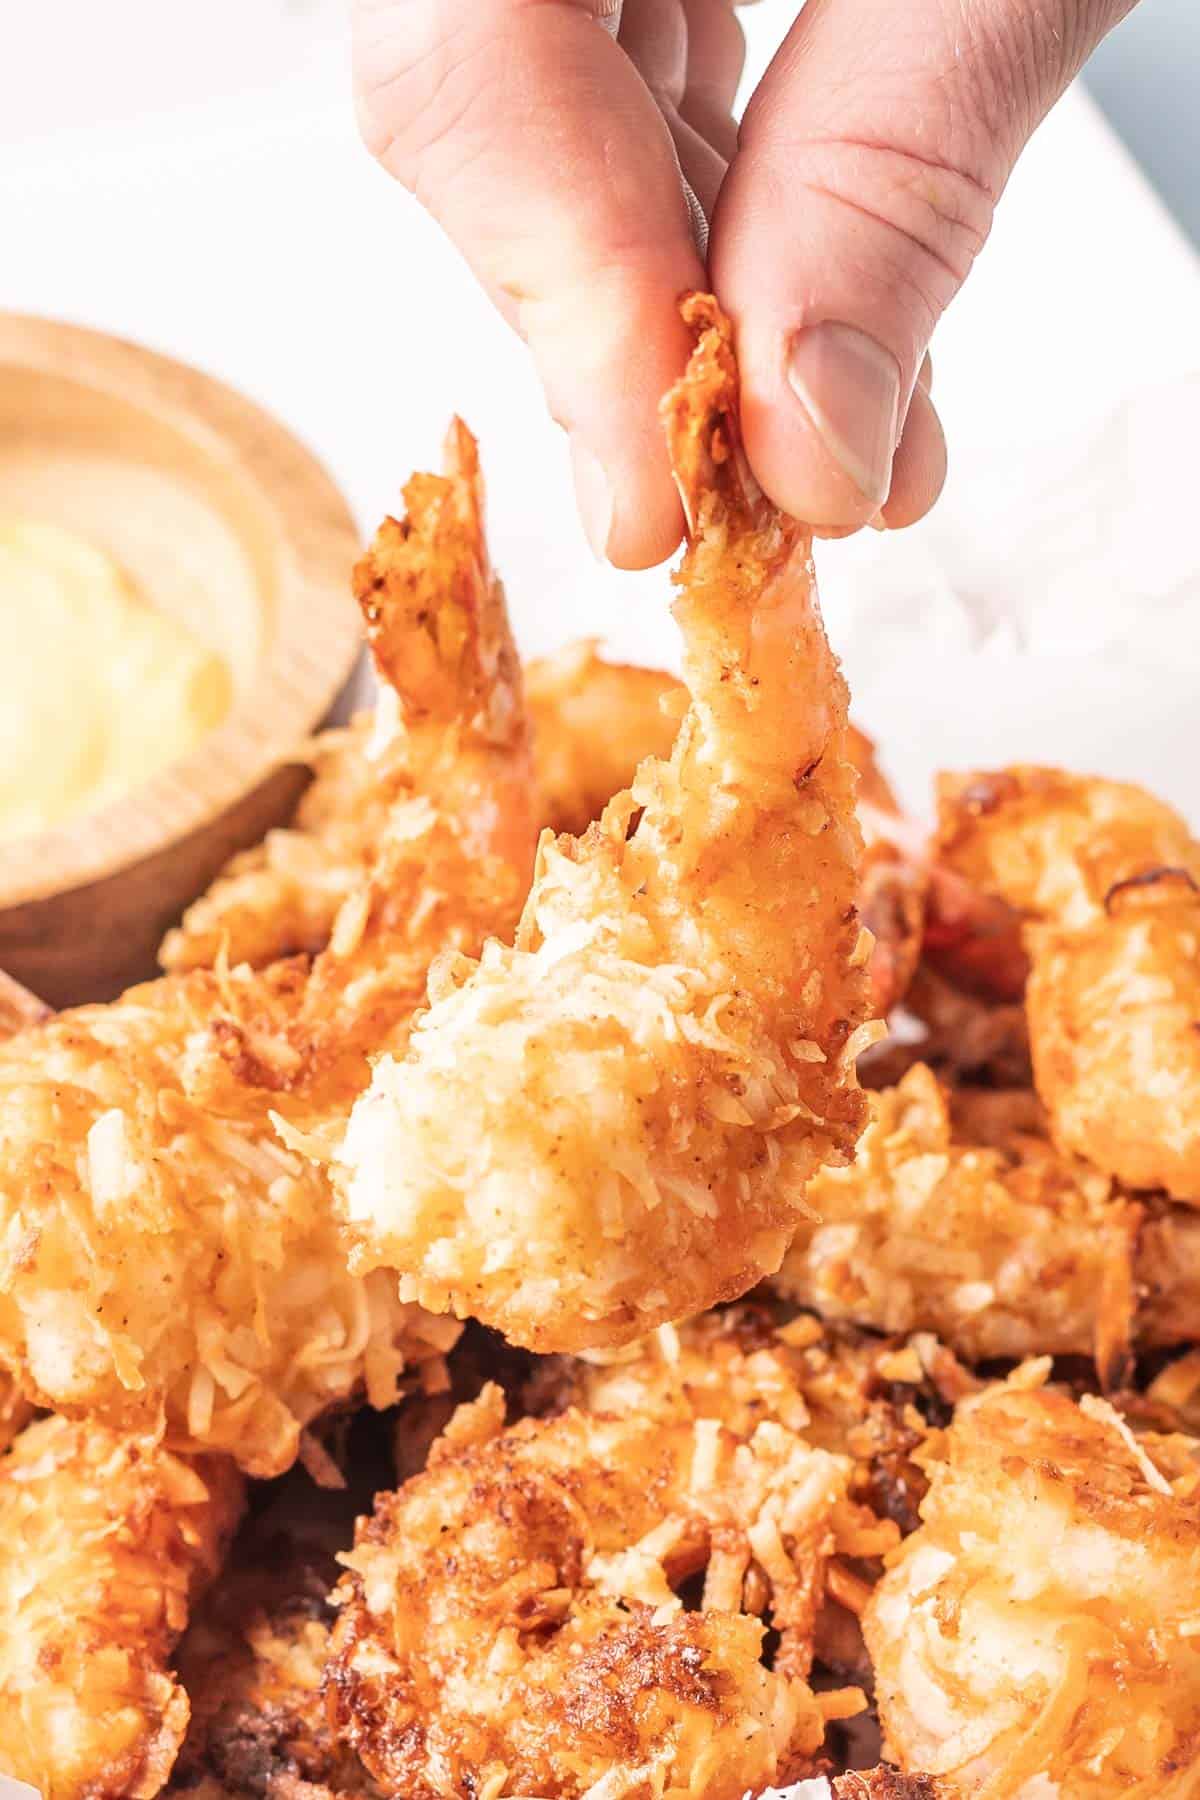 A hand picking up a single coconut shrimp from the serving tray